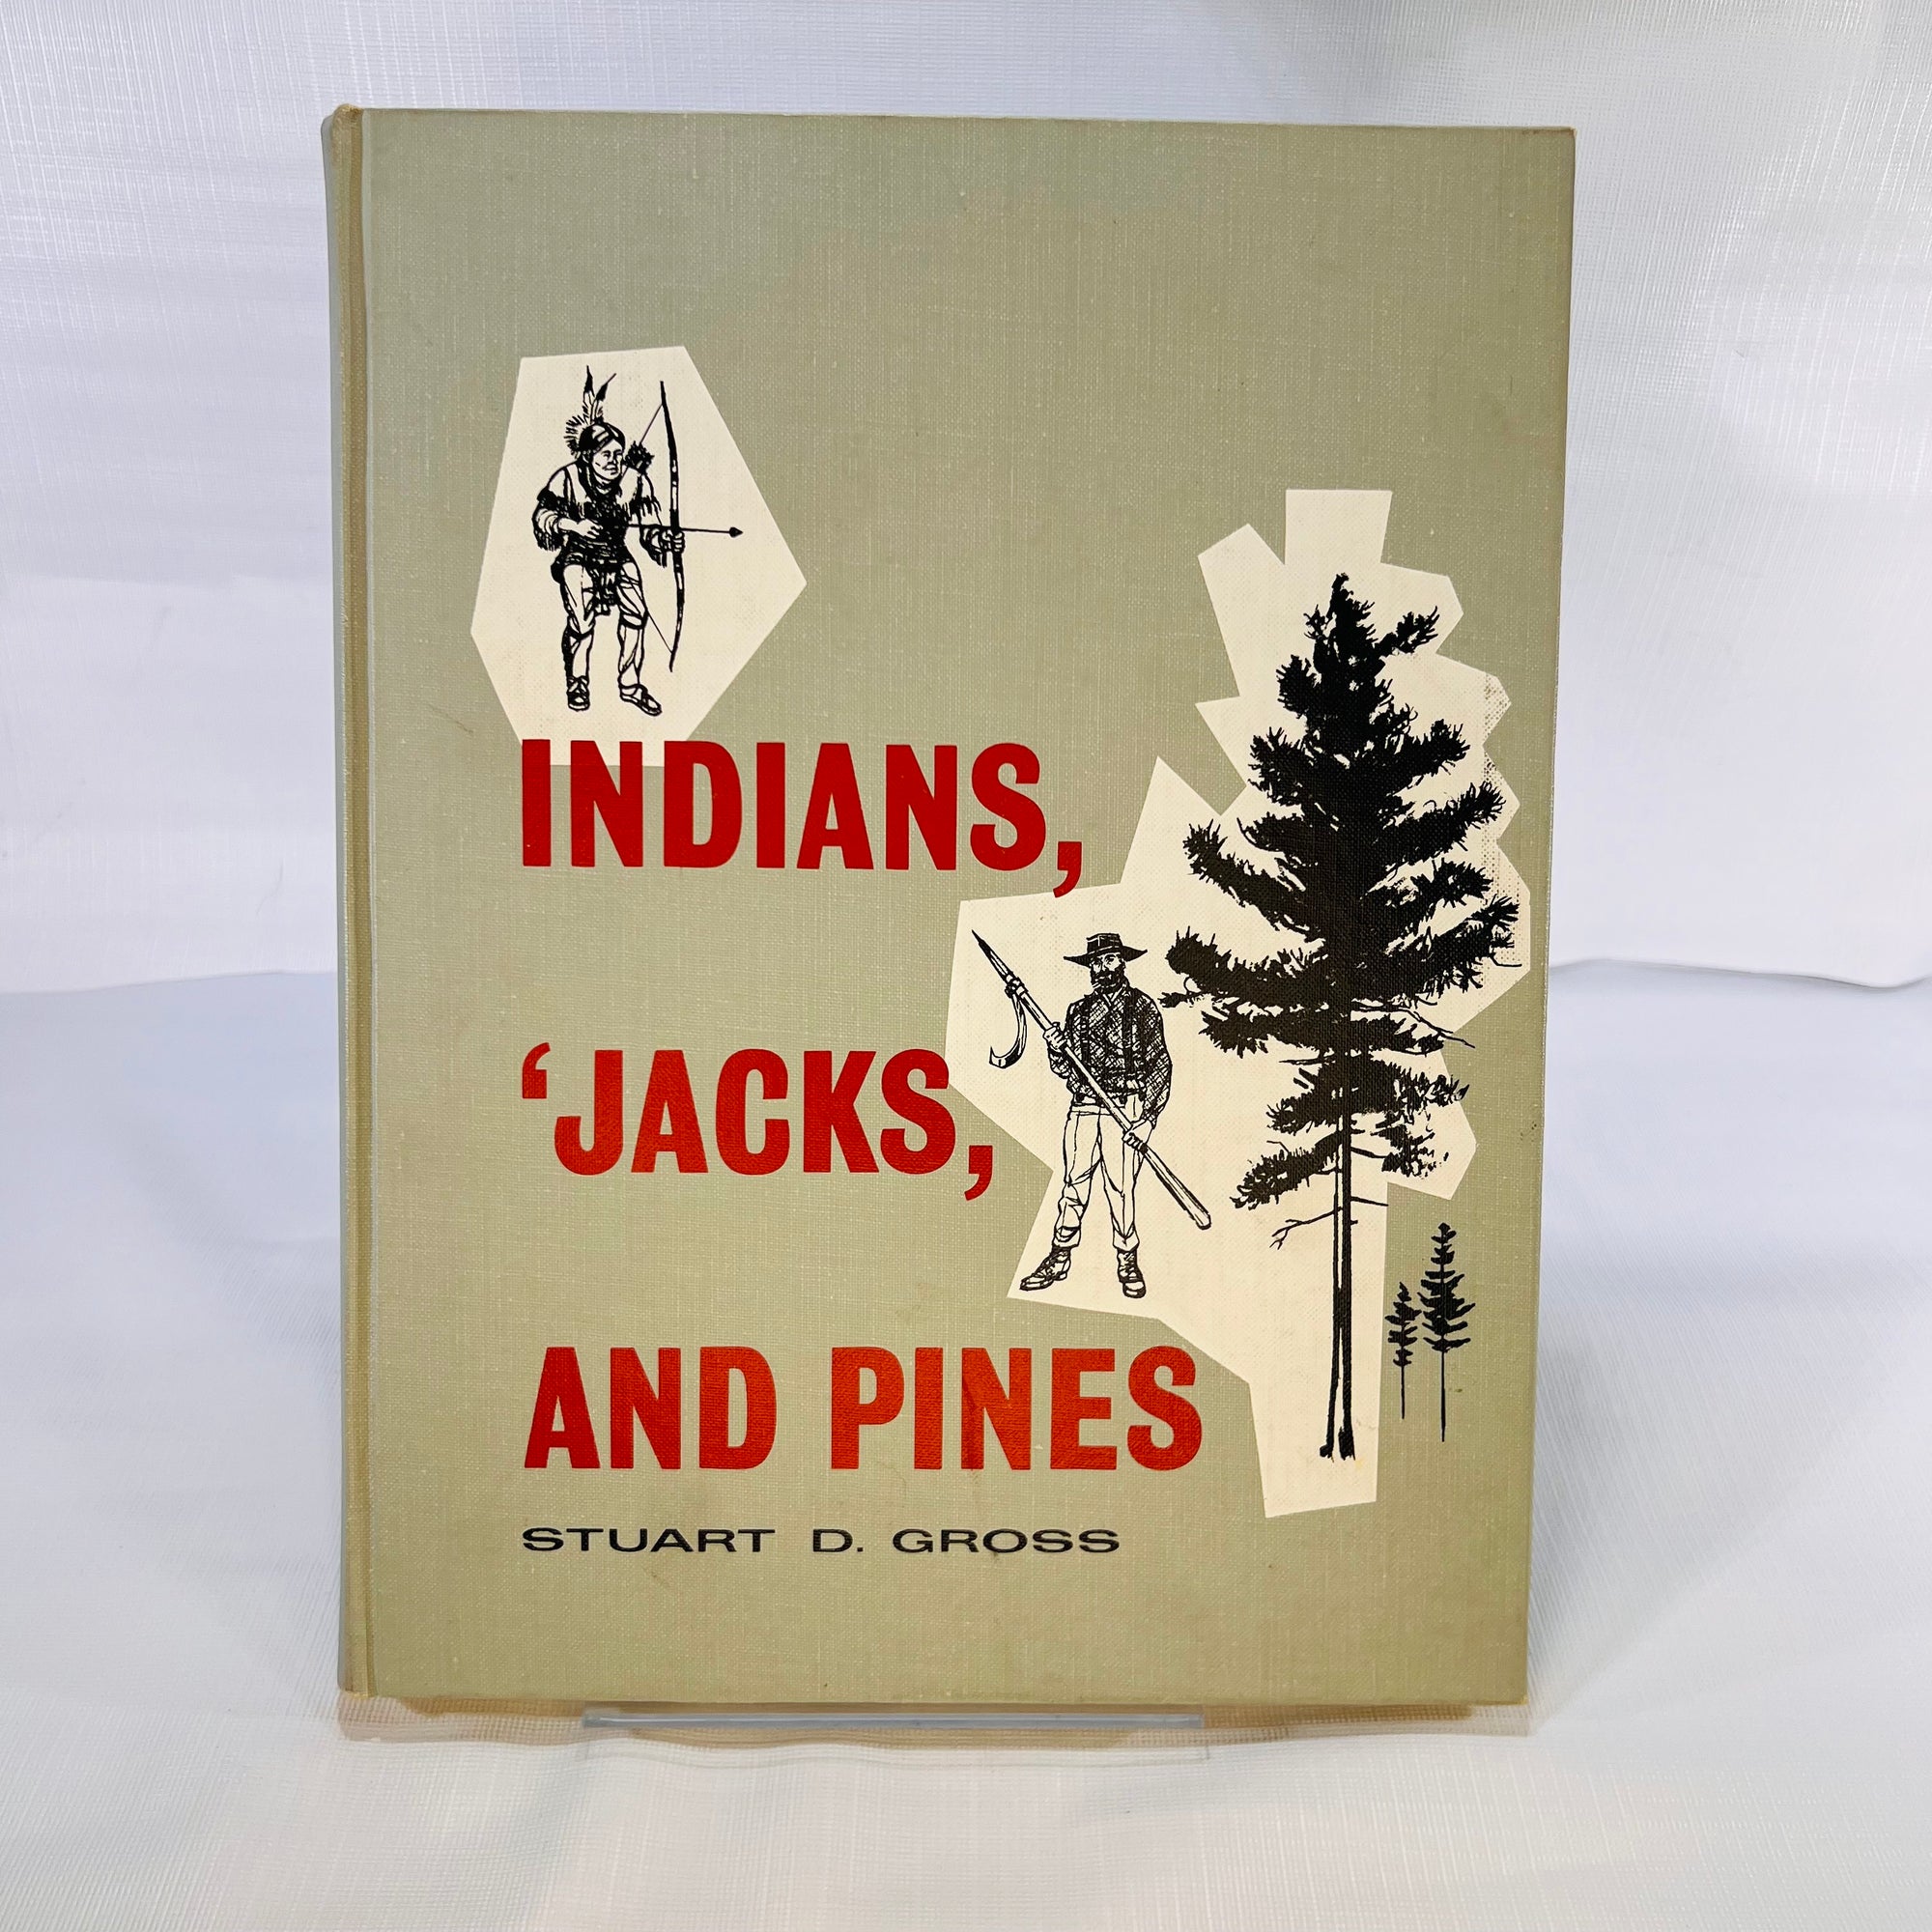 Indians 'Jacks and Pines A History of Saginaw by Stuart D. Gross Illustrated by Ralph A. Misiak 1962